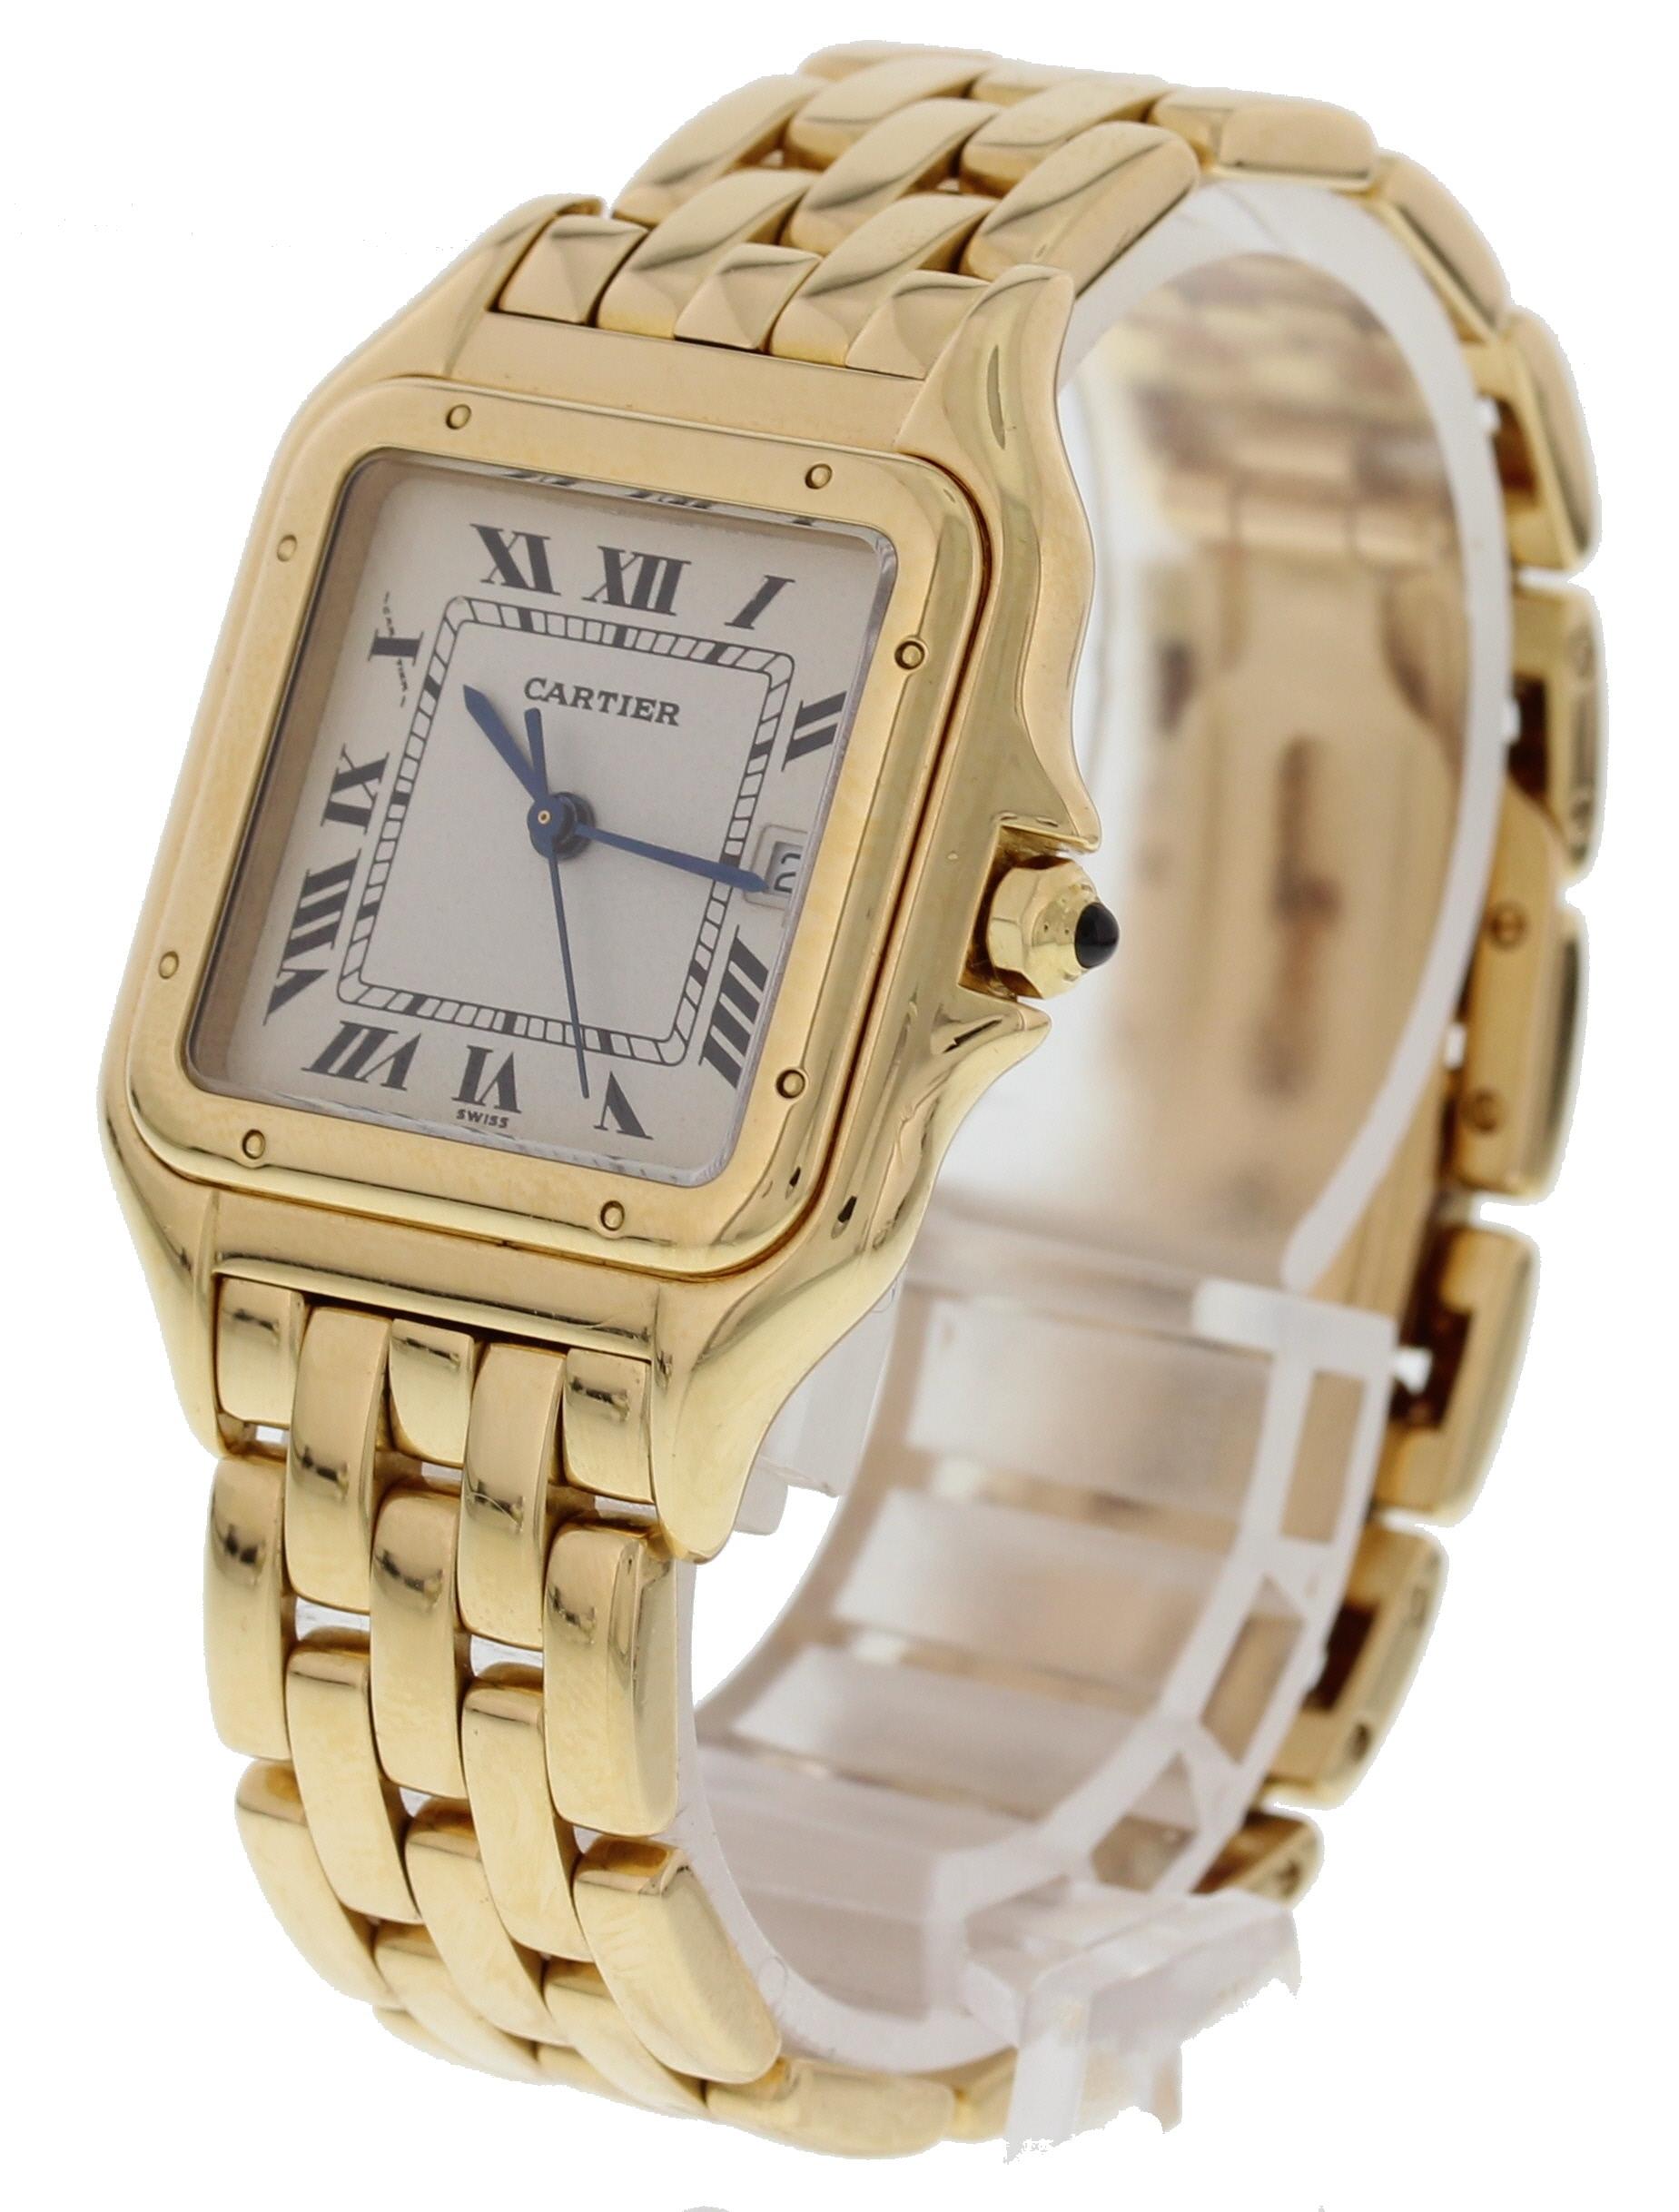 Cartier Panthere Large 887968 Watch. 
29mm 18k Yellow gold case. 
Yellow gold Stationary bezel. 
Off-White dial with Blue steel hands and Roman numeral hour markers. 
Minute markers on the outer dial. 
Date display at the 3 o'clock position. 
Yellow